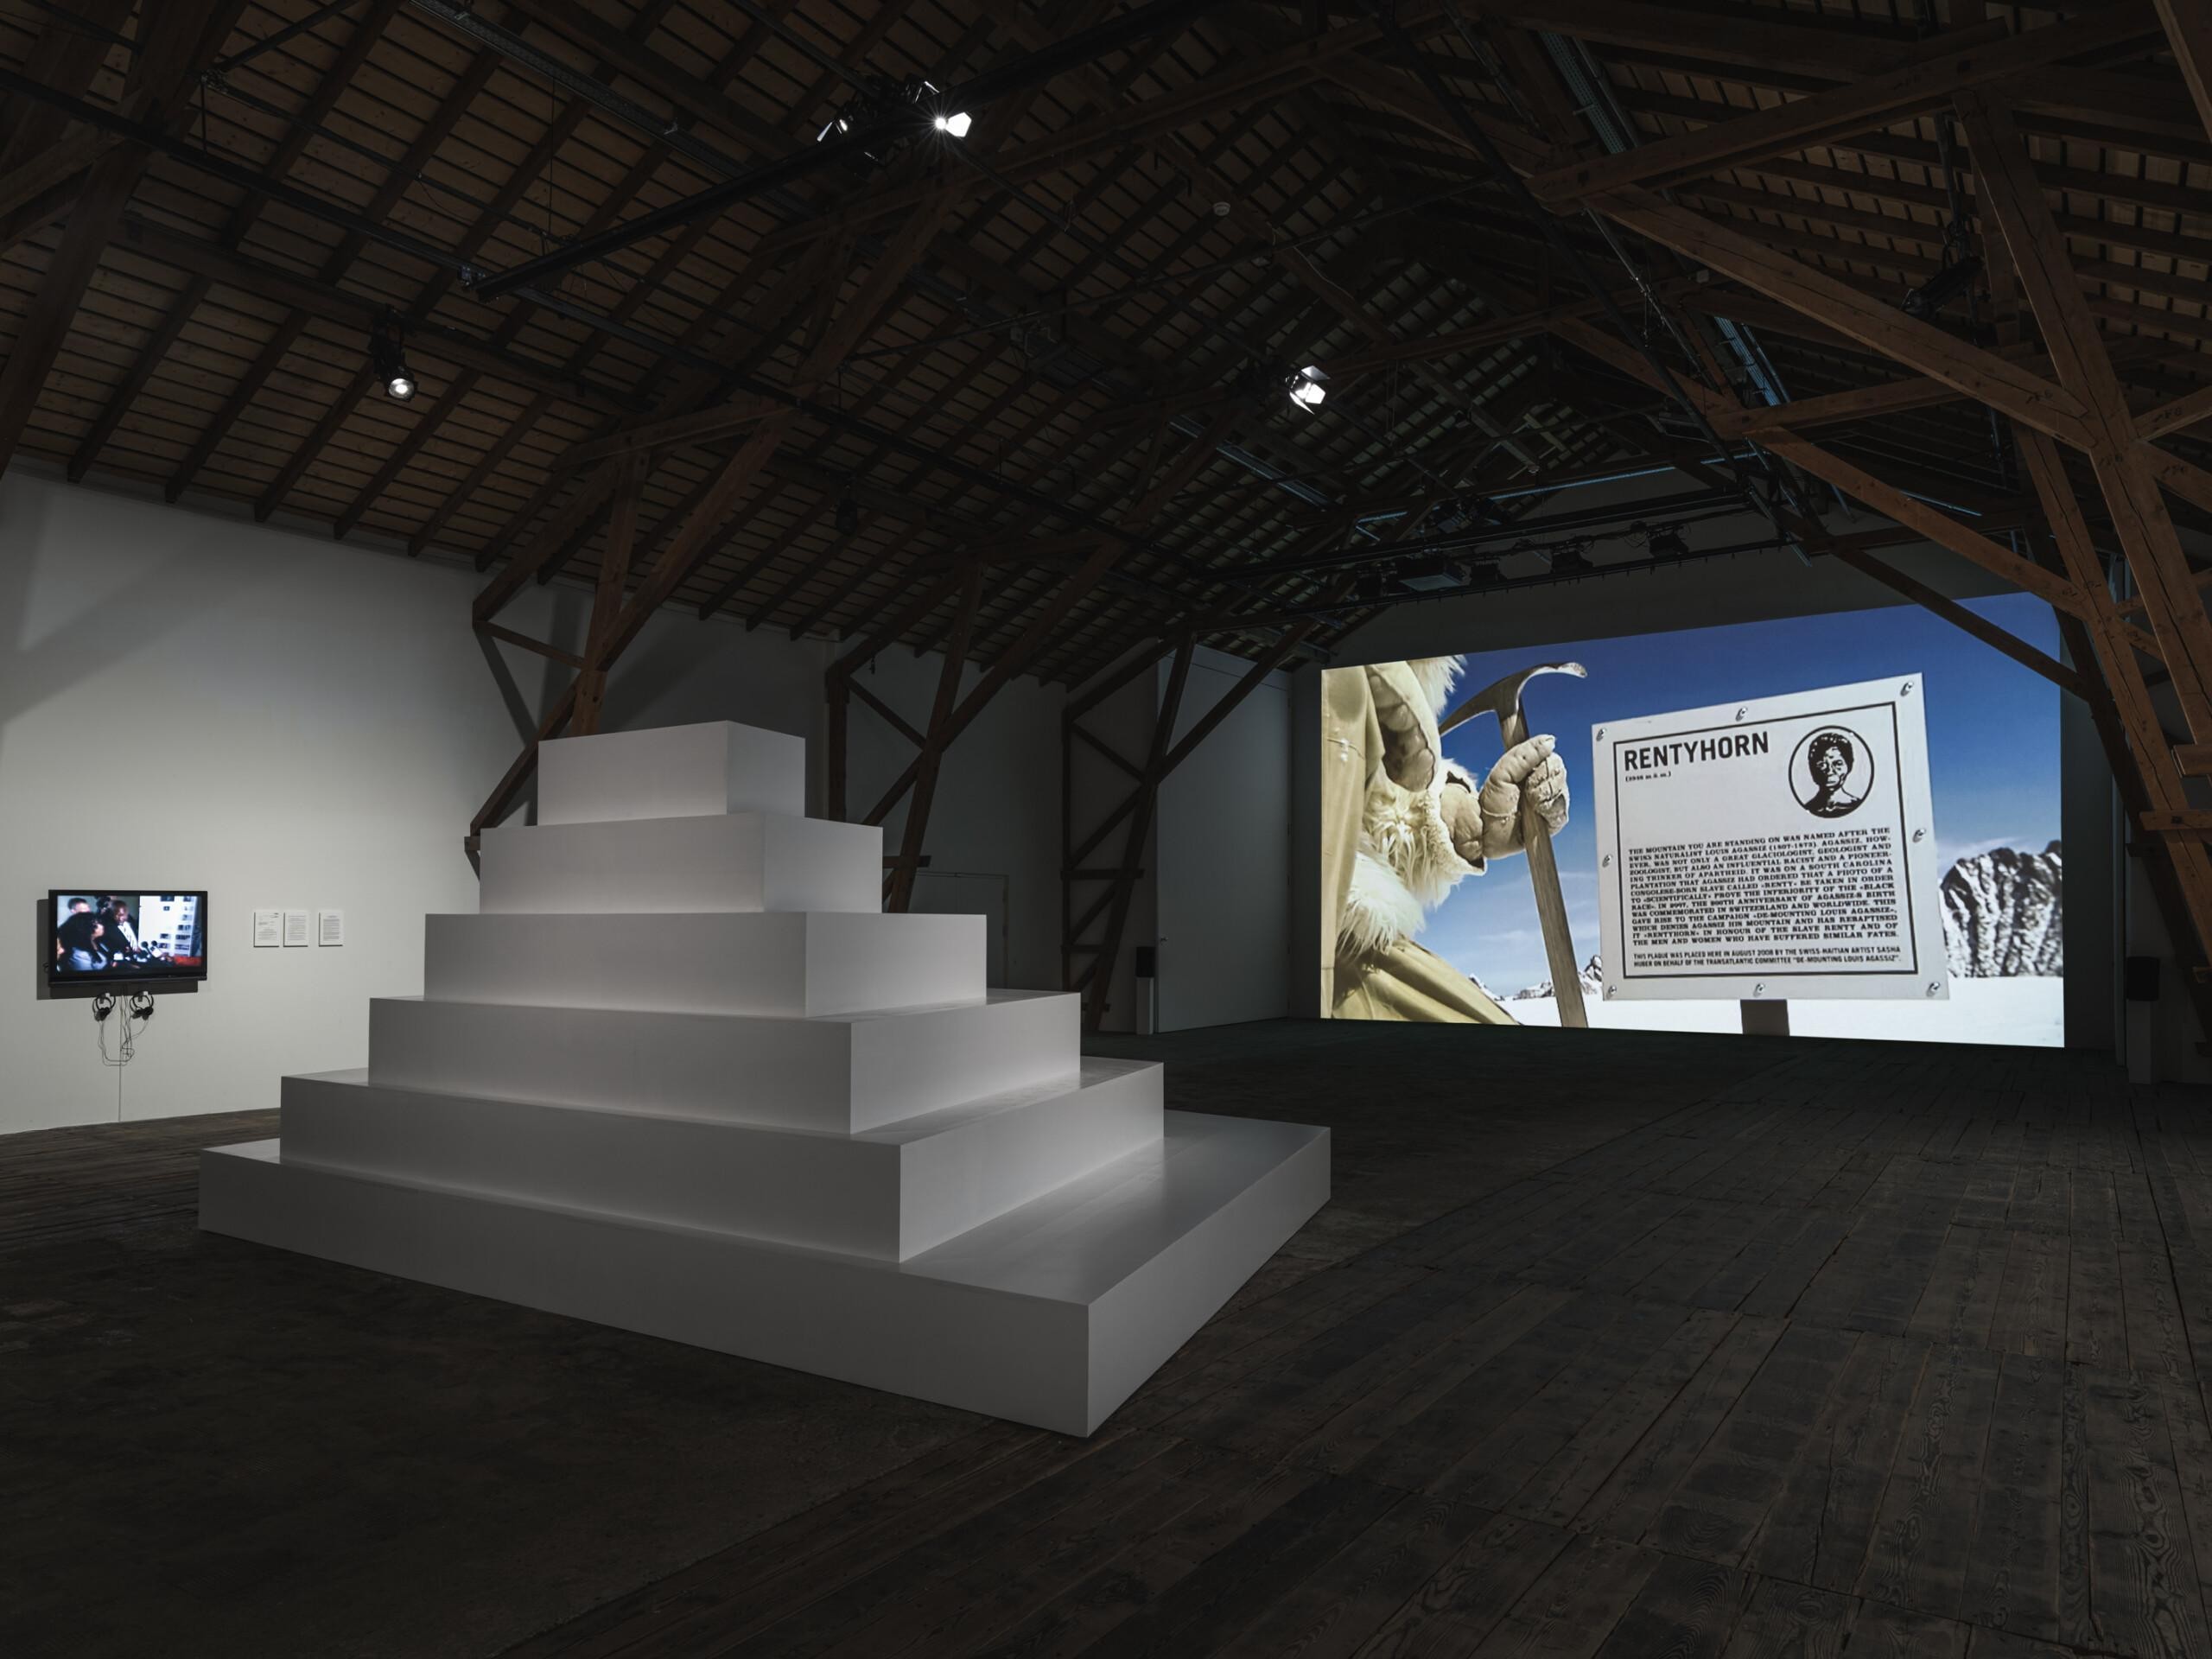 An exhibition space with dark wooden floor and ceiling and white walls. There is a white pyramid-like staircase in the middle of the space, and a big screen in the back wall showcasing art works by artist Sasha Huber.